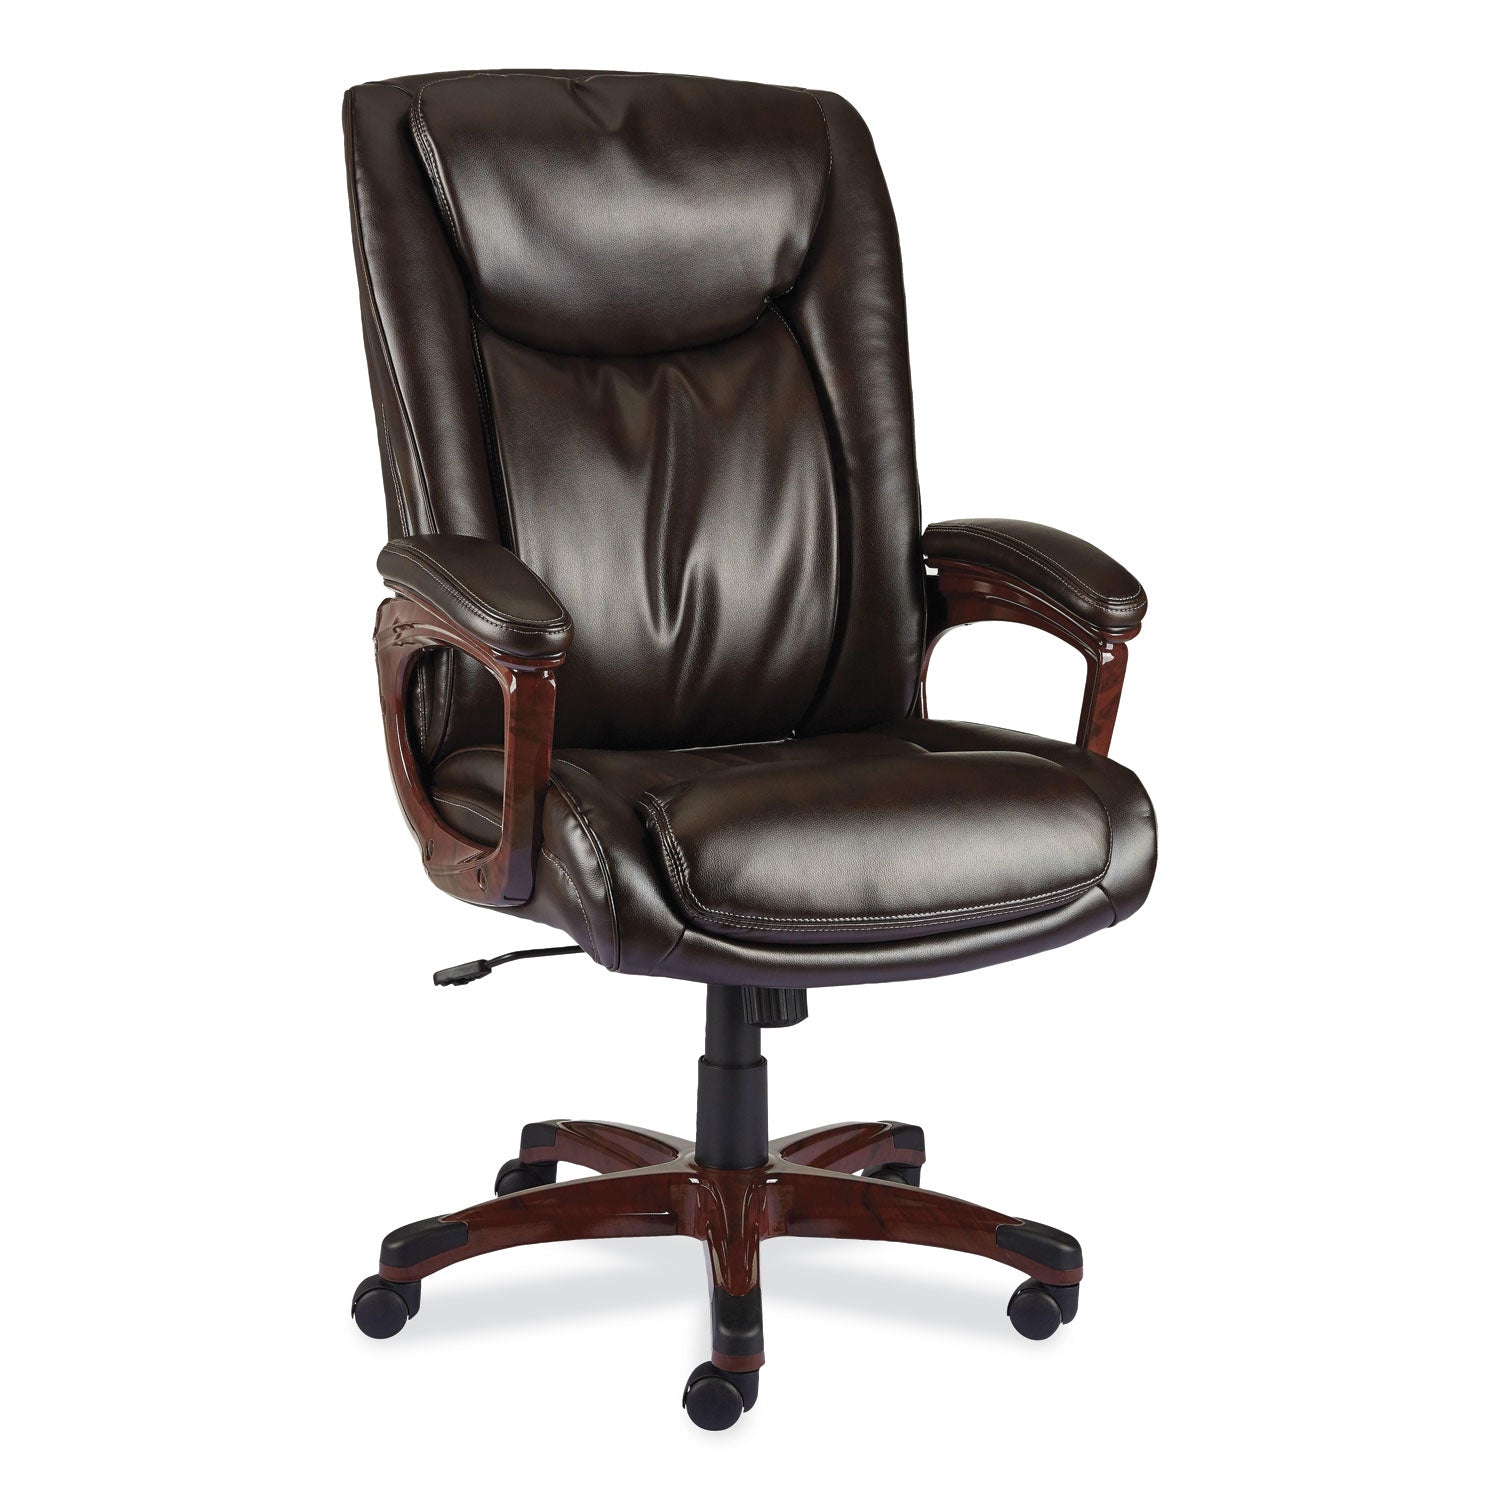 Alera Darnick Series Manager Chair, Supports Up to 275 lbs, 17.13" to 20.12" Seat Height, Brown Seat/Back, Brown Base - 1